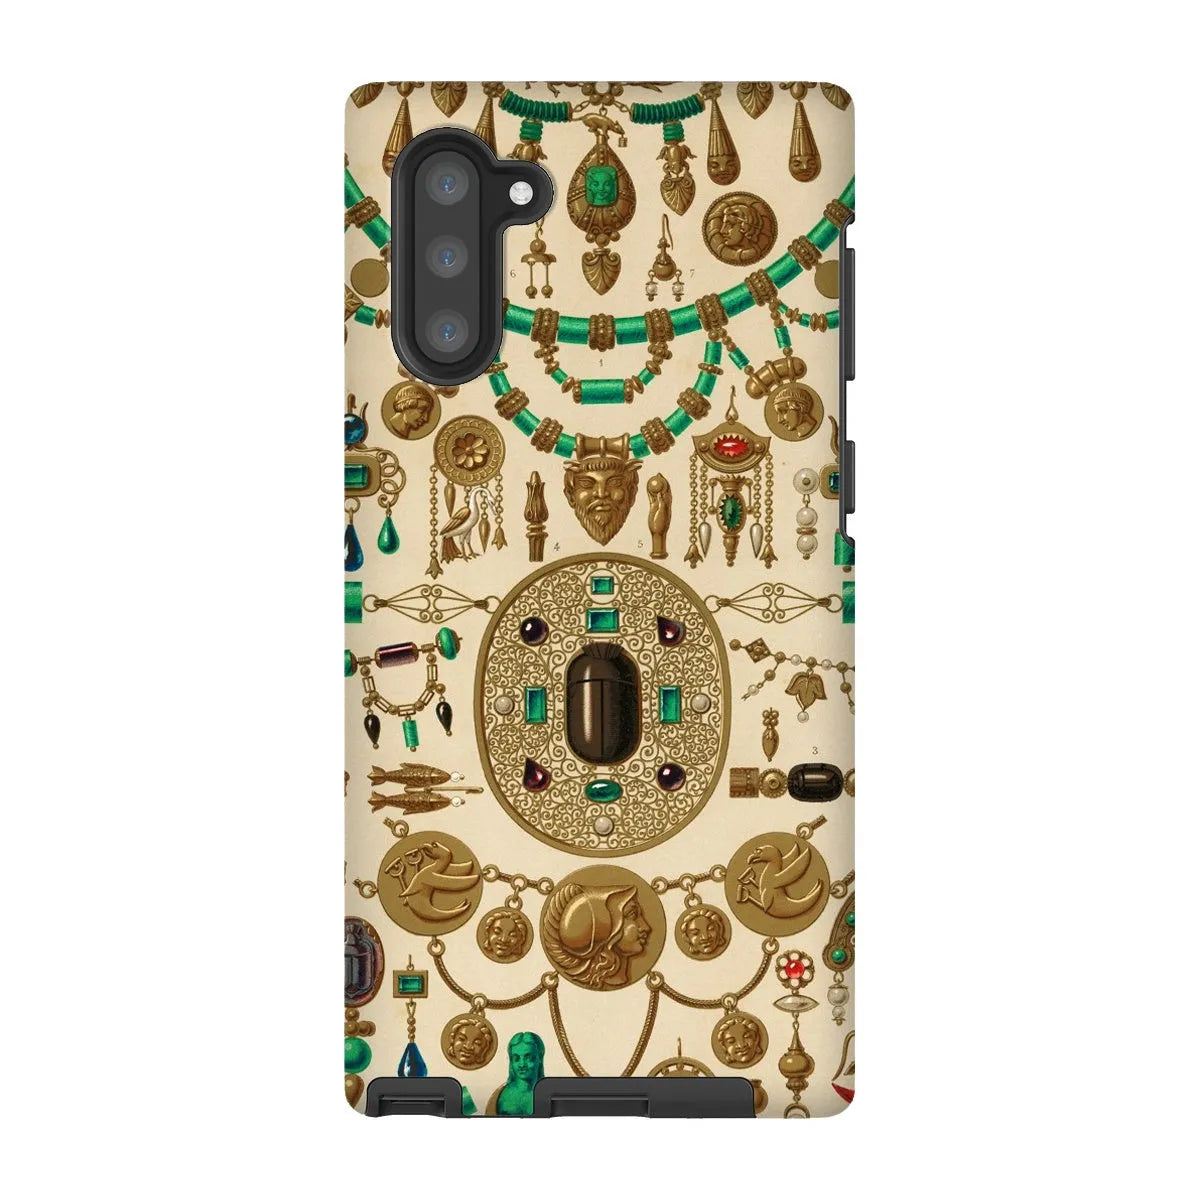 Etruscan Patterns From L’ornement Polychrome By Auguste Racinet Tough Phone Case - Samsung Galaxy Note 10 / Matte